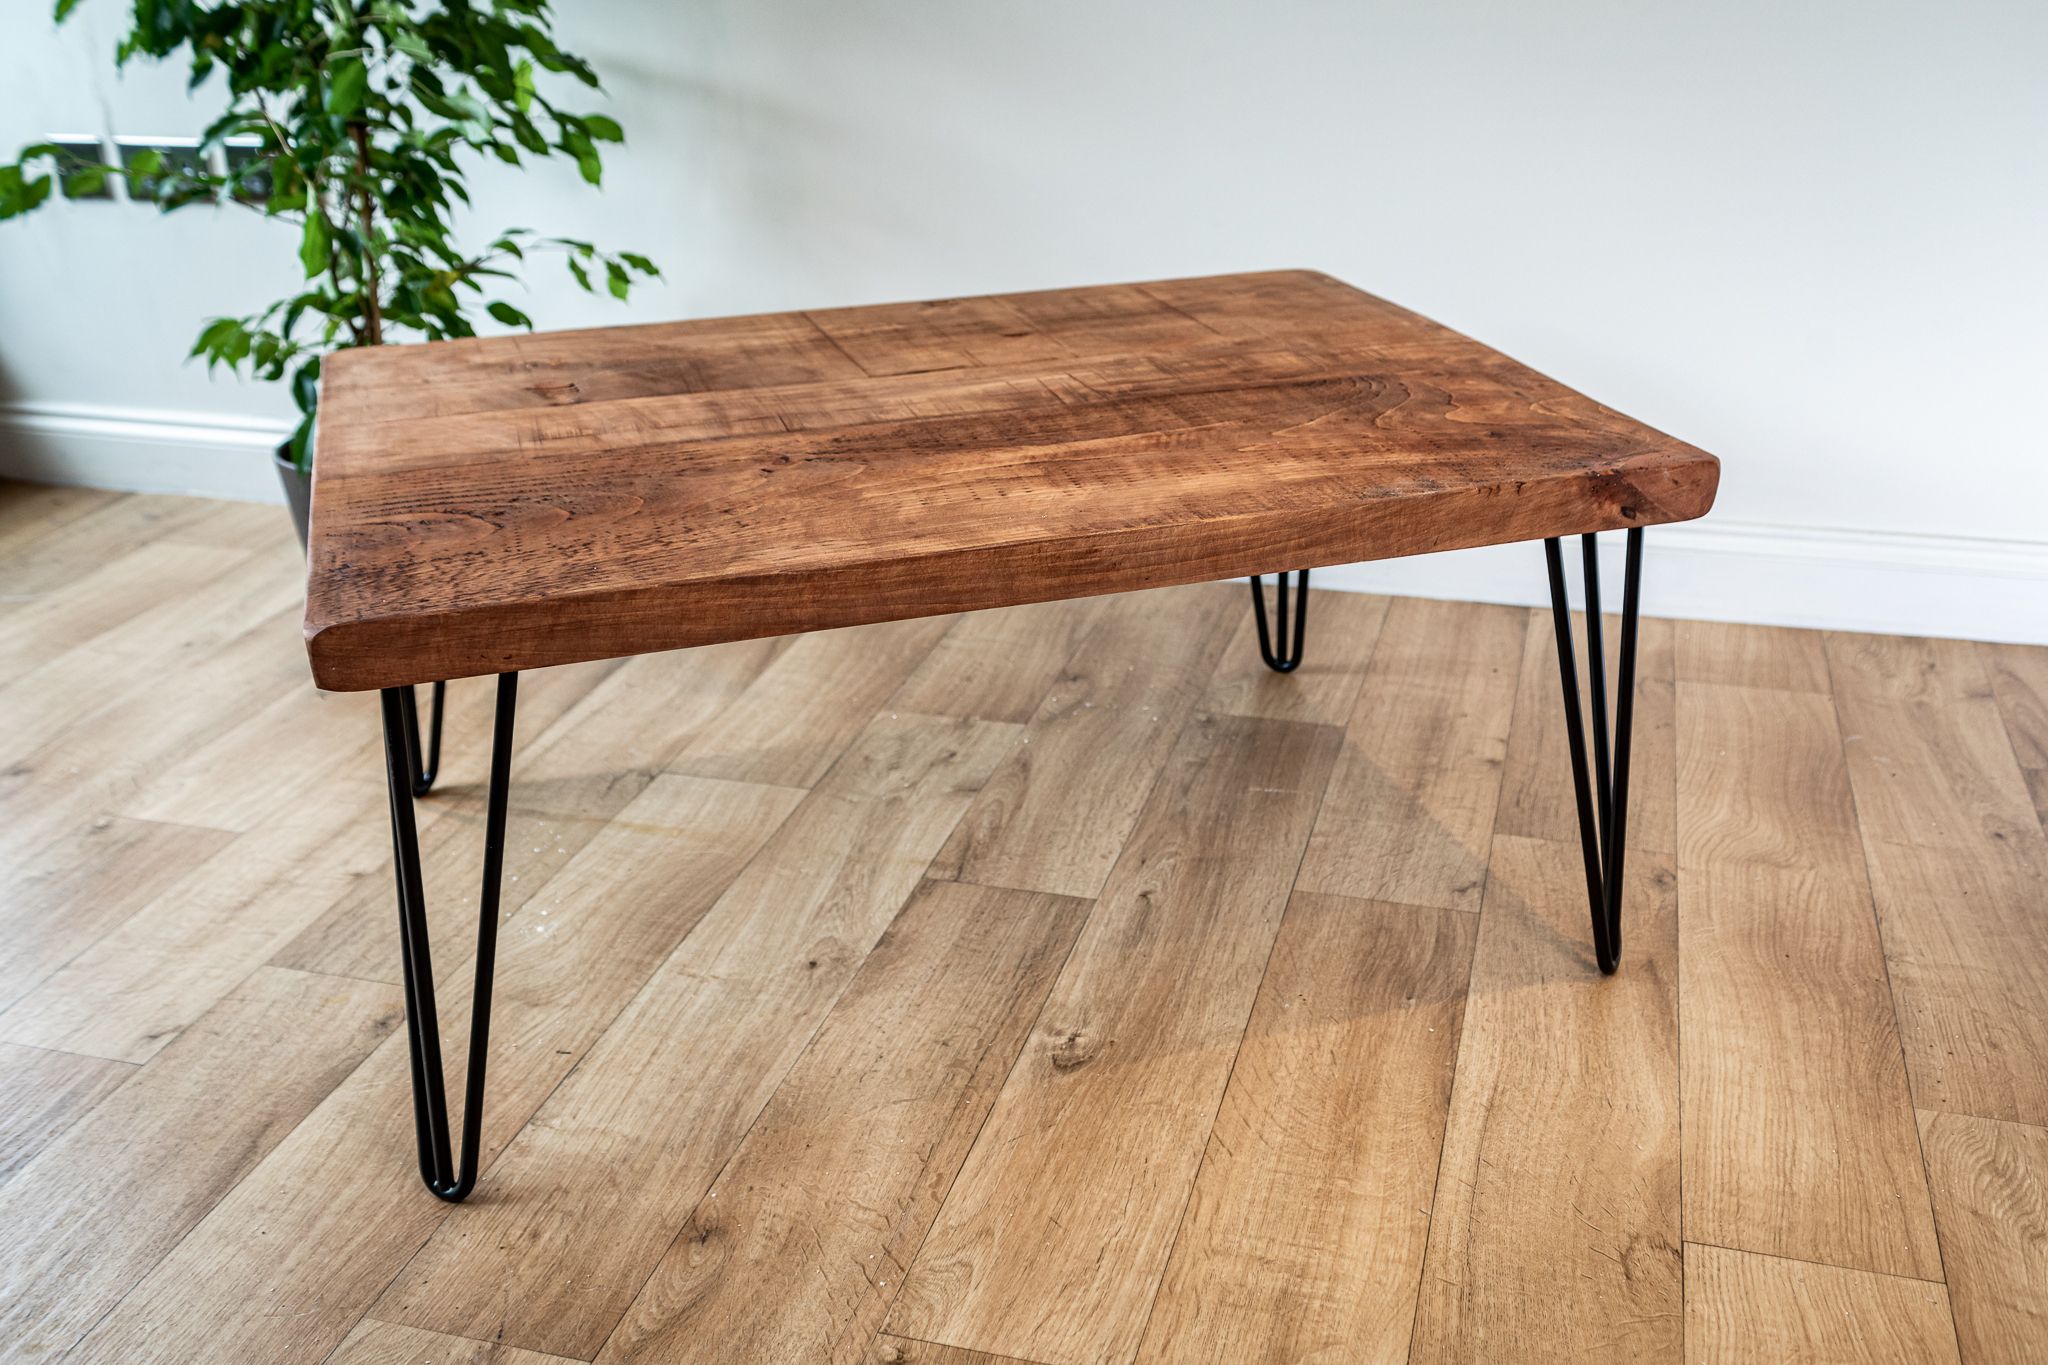 Hairpin Leg Coffee Table – Rustic Reclaimed Plank Wood Top In Well Known Heartwood Cherry Wood Coffee Tables (View 13 of 20)